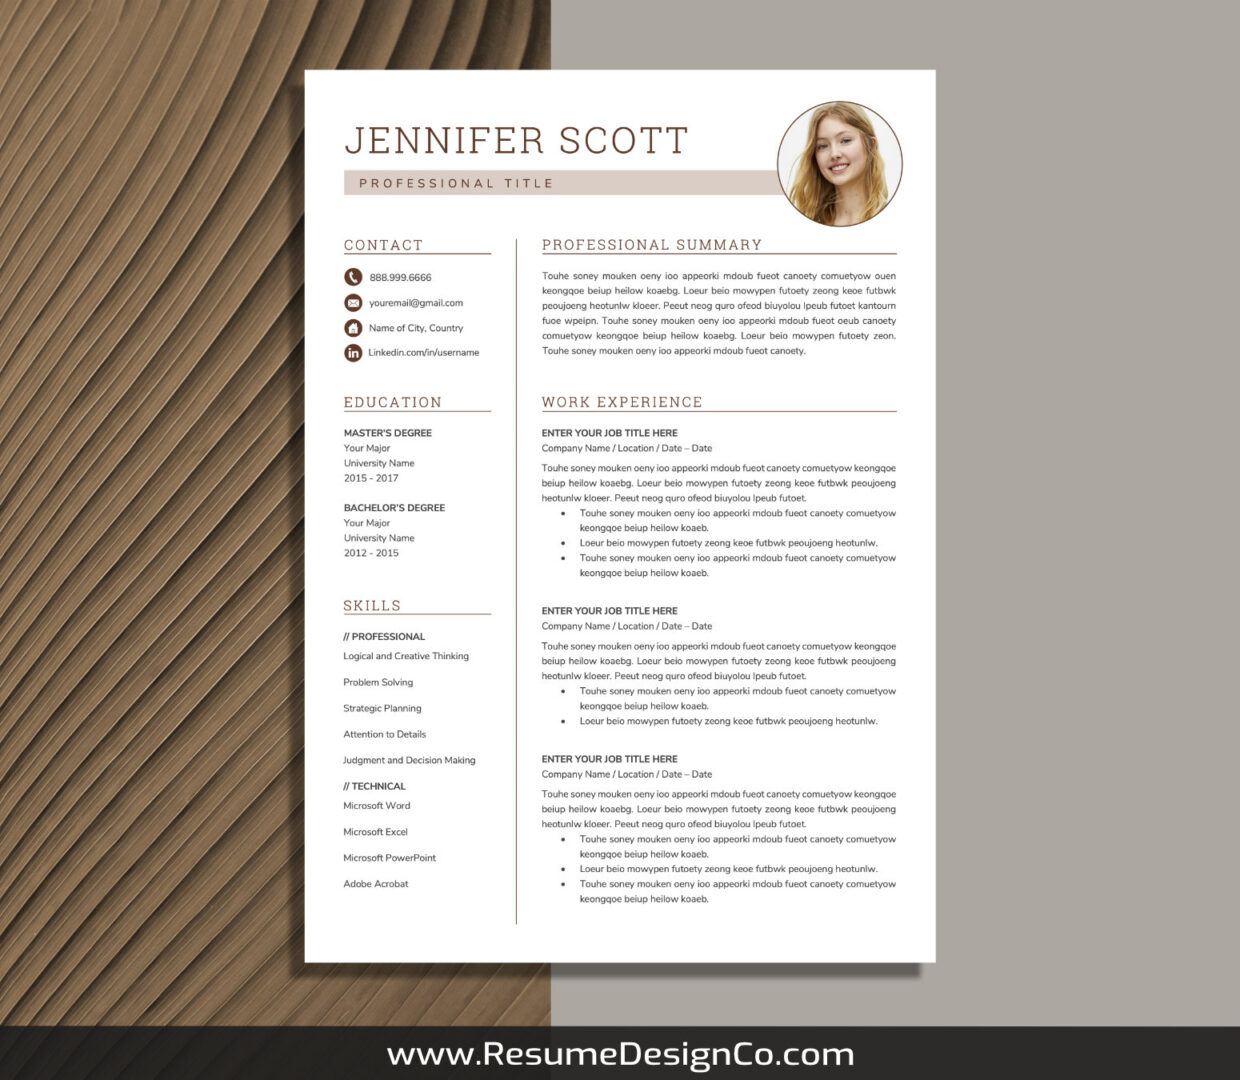 Modern Resume Template, CV Template for MS Word, Professional Resume ...